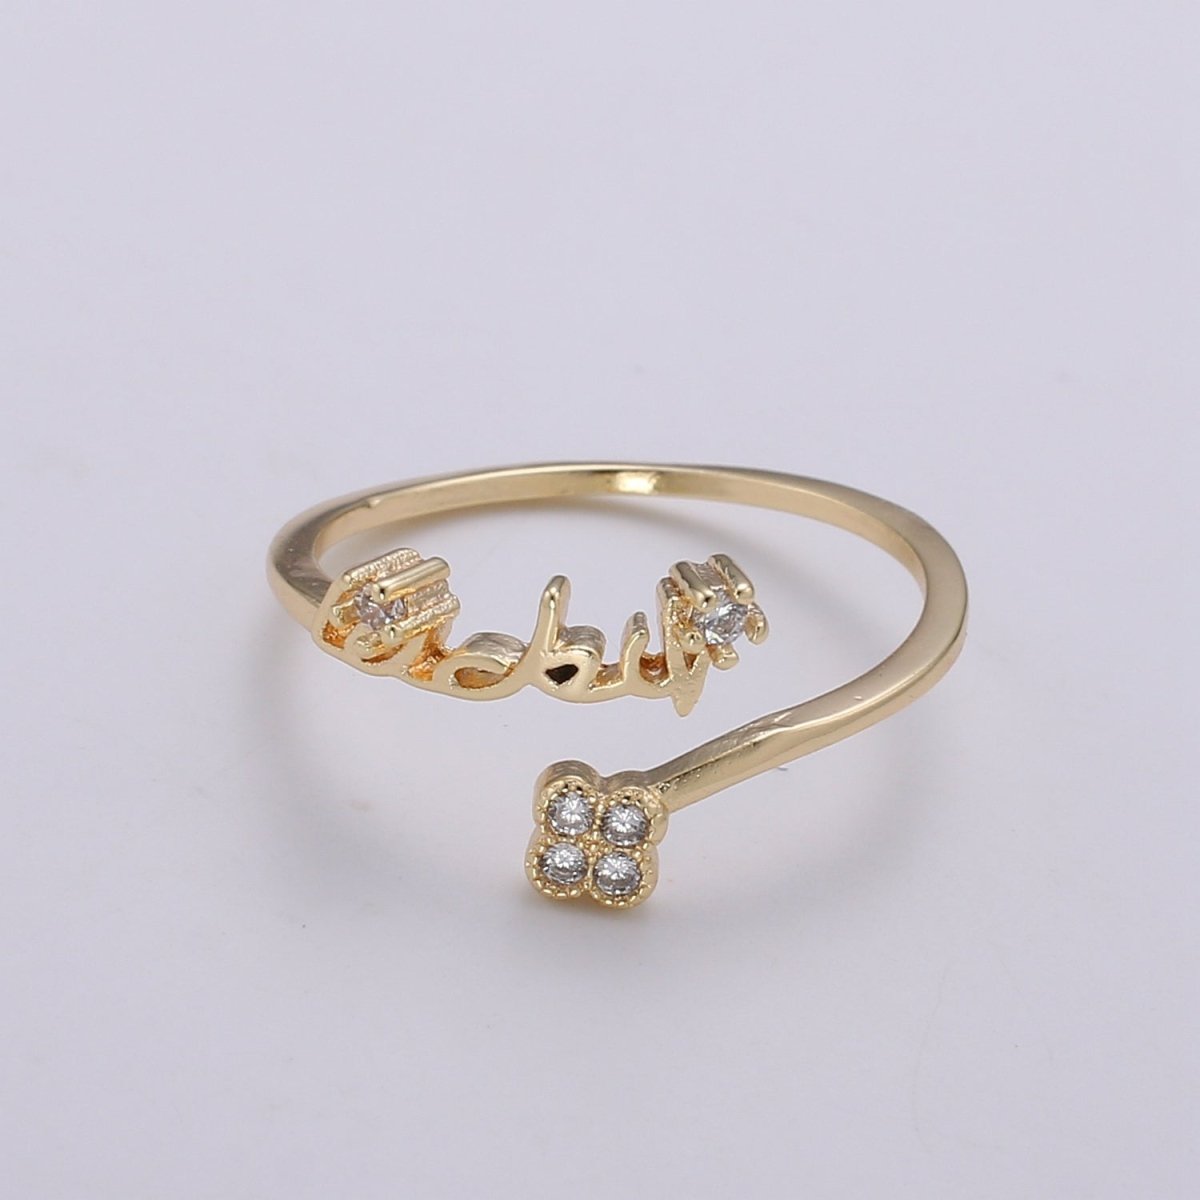 Gold Adjustable Clover Ring with Cz Stone, Four Leaf Clover Good Luck Ring for Her Floral Ring for Minimalist Jewelry R-182 - DLUXCA